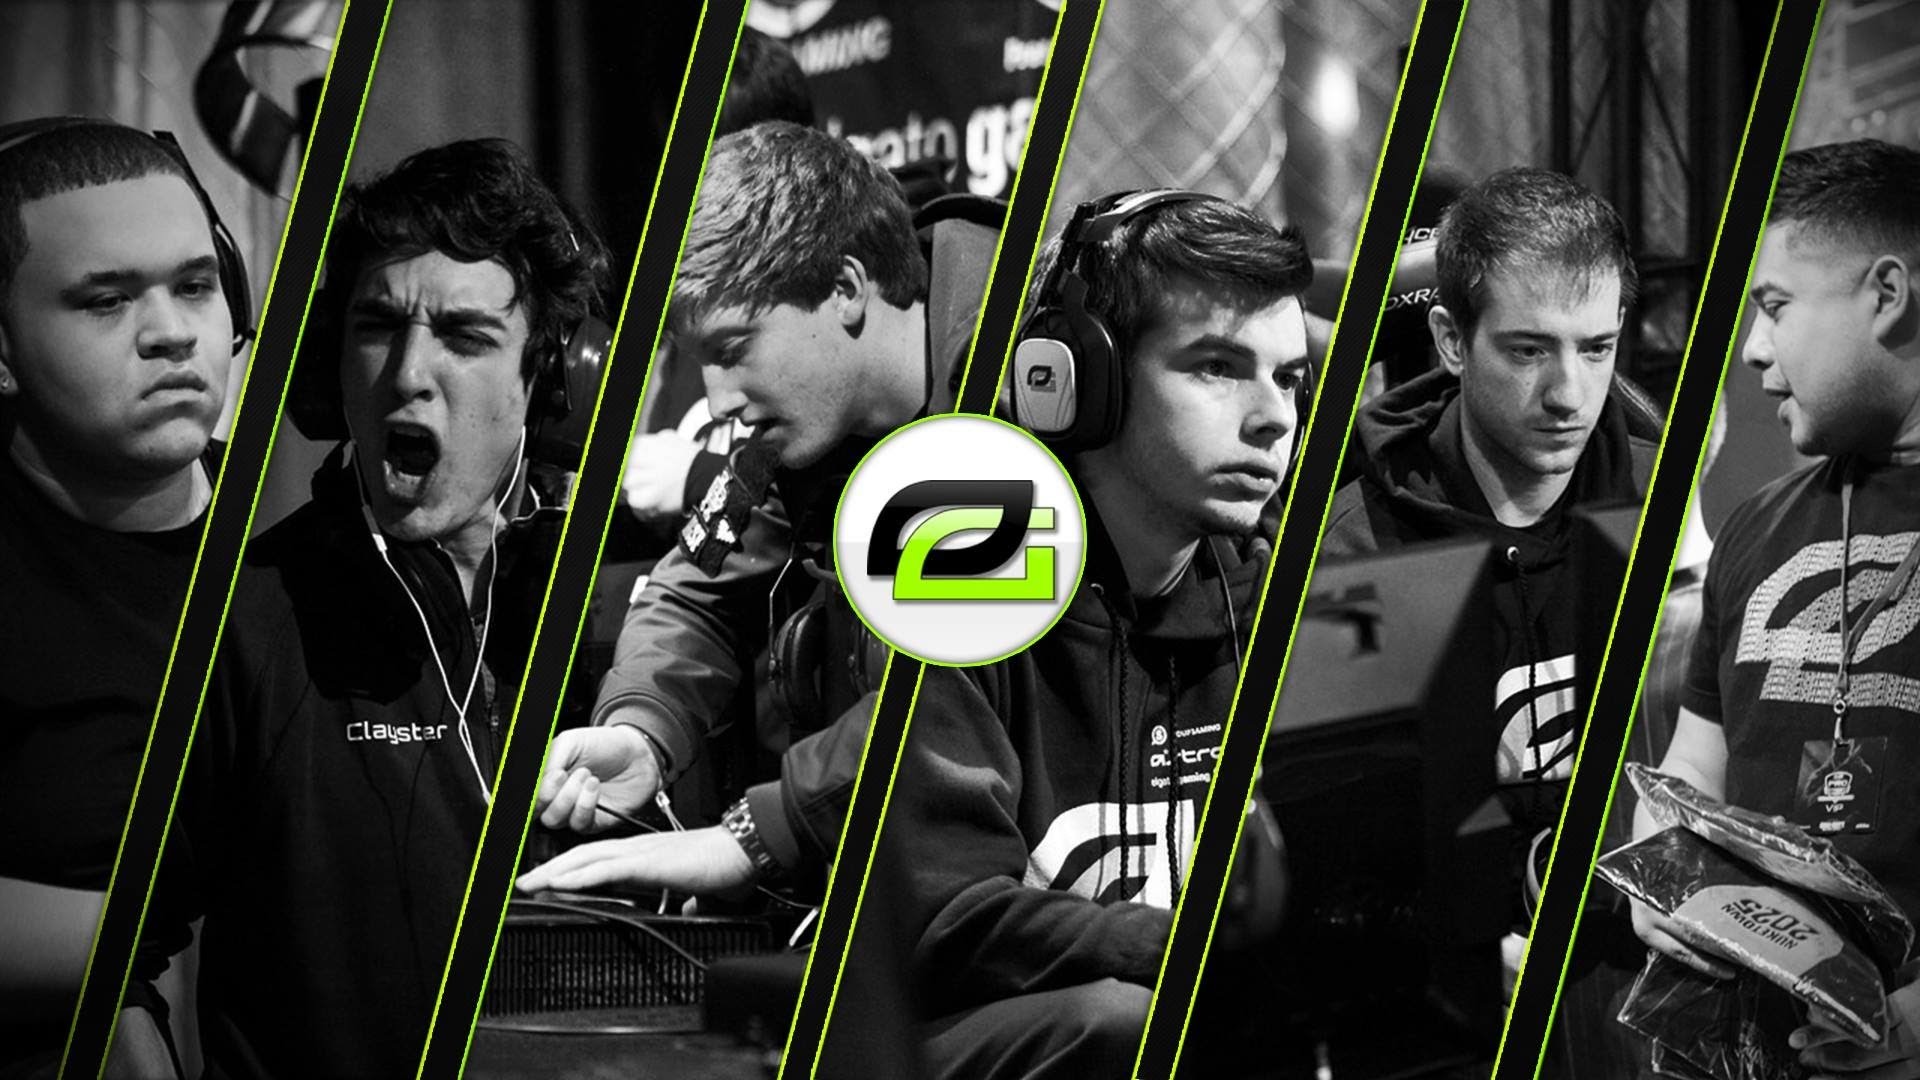 1920x1080 Optic gaming roster wallpapers.